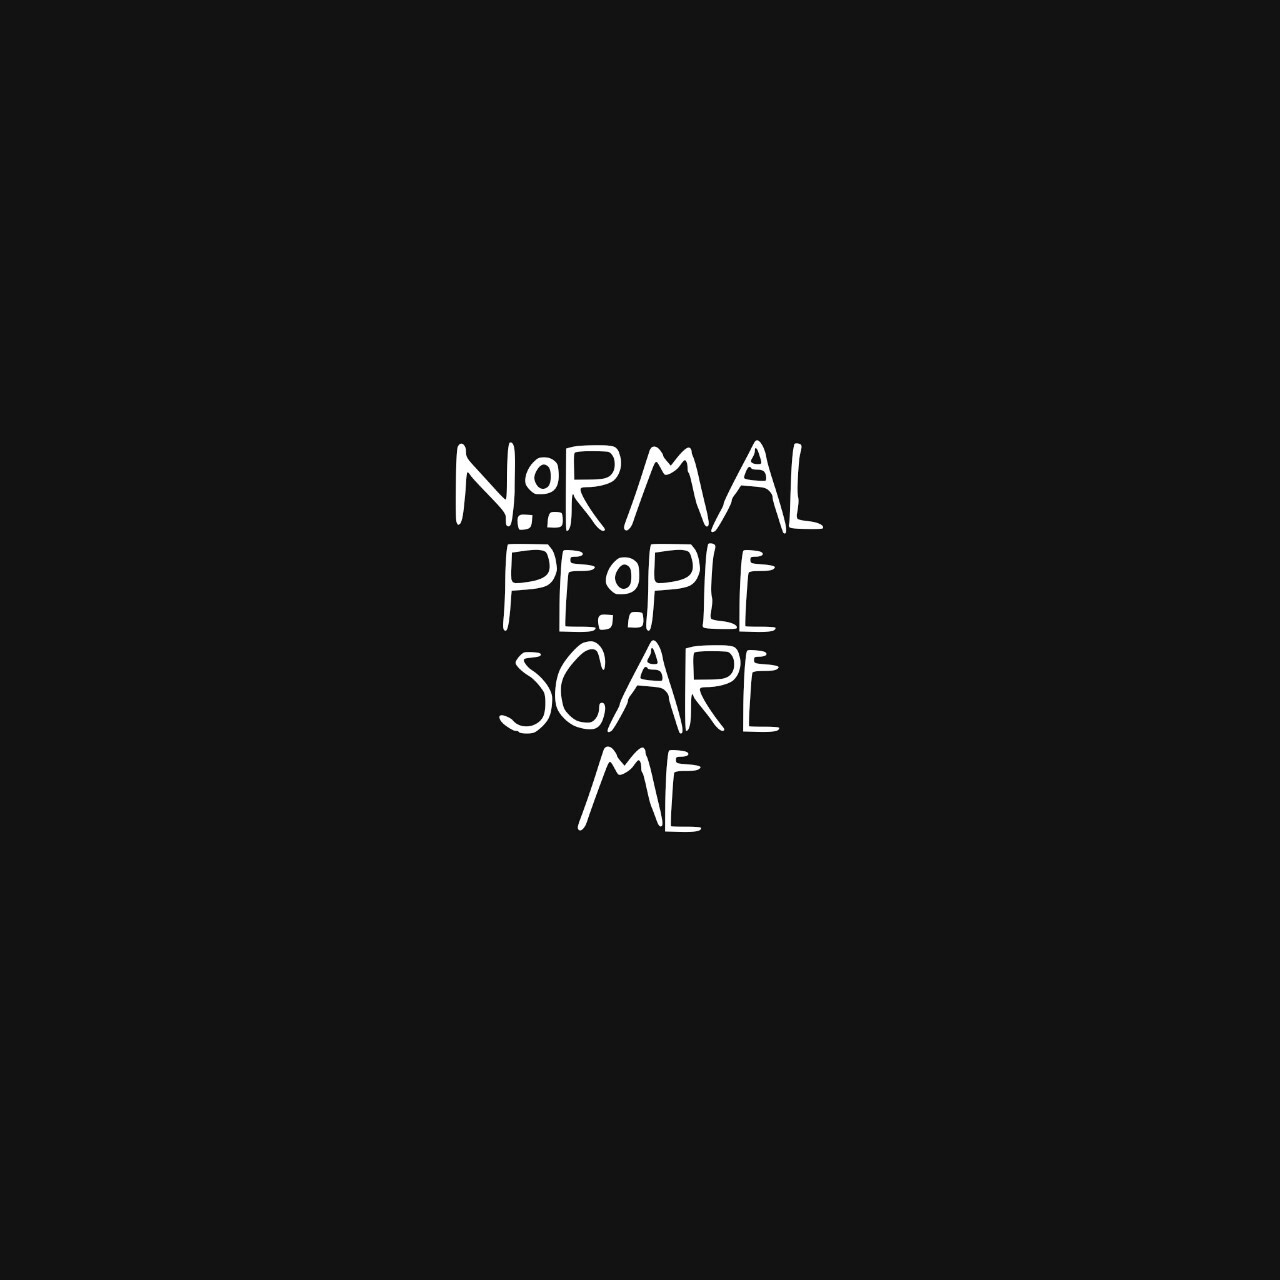 Normal People Scare Me Wallpaper Image Collections Of